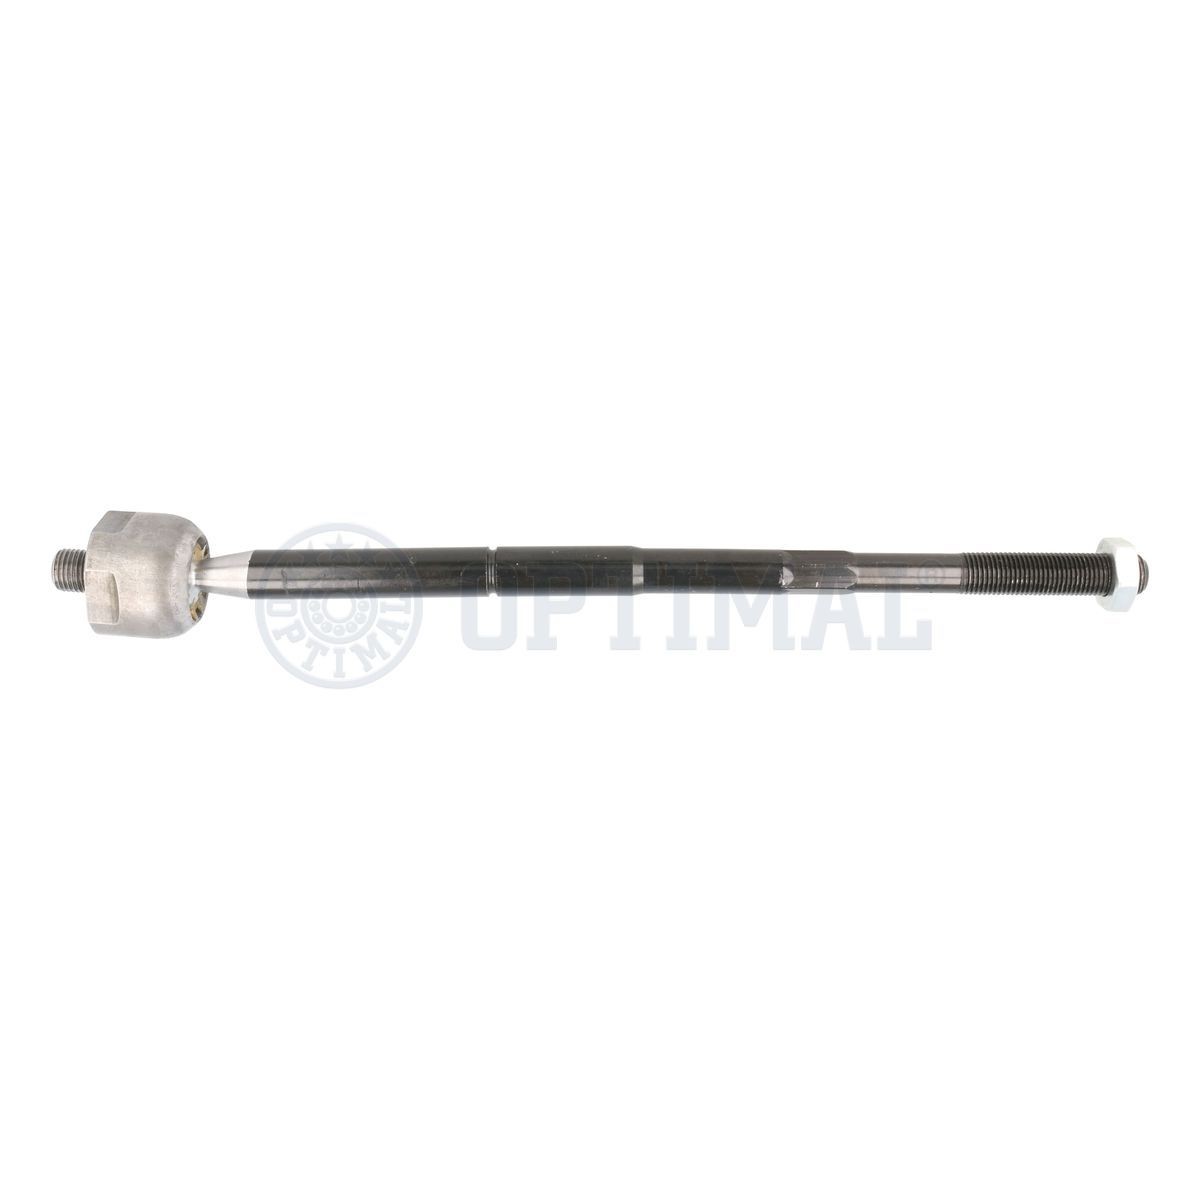 OPTIMAL Front Axle Left, Front Axle Right, M14 x 1,50 RHT M, 334 mm Length: 334mm Tie rod axle joint G2-1309 buy